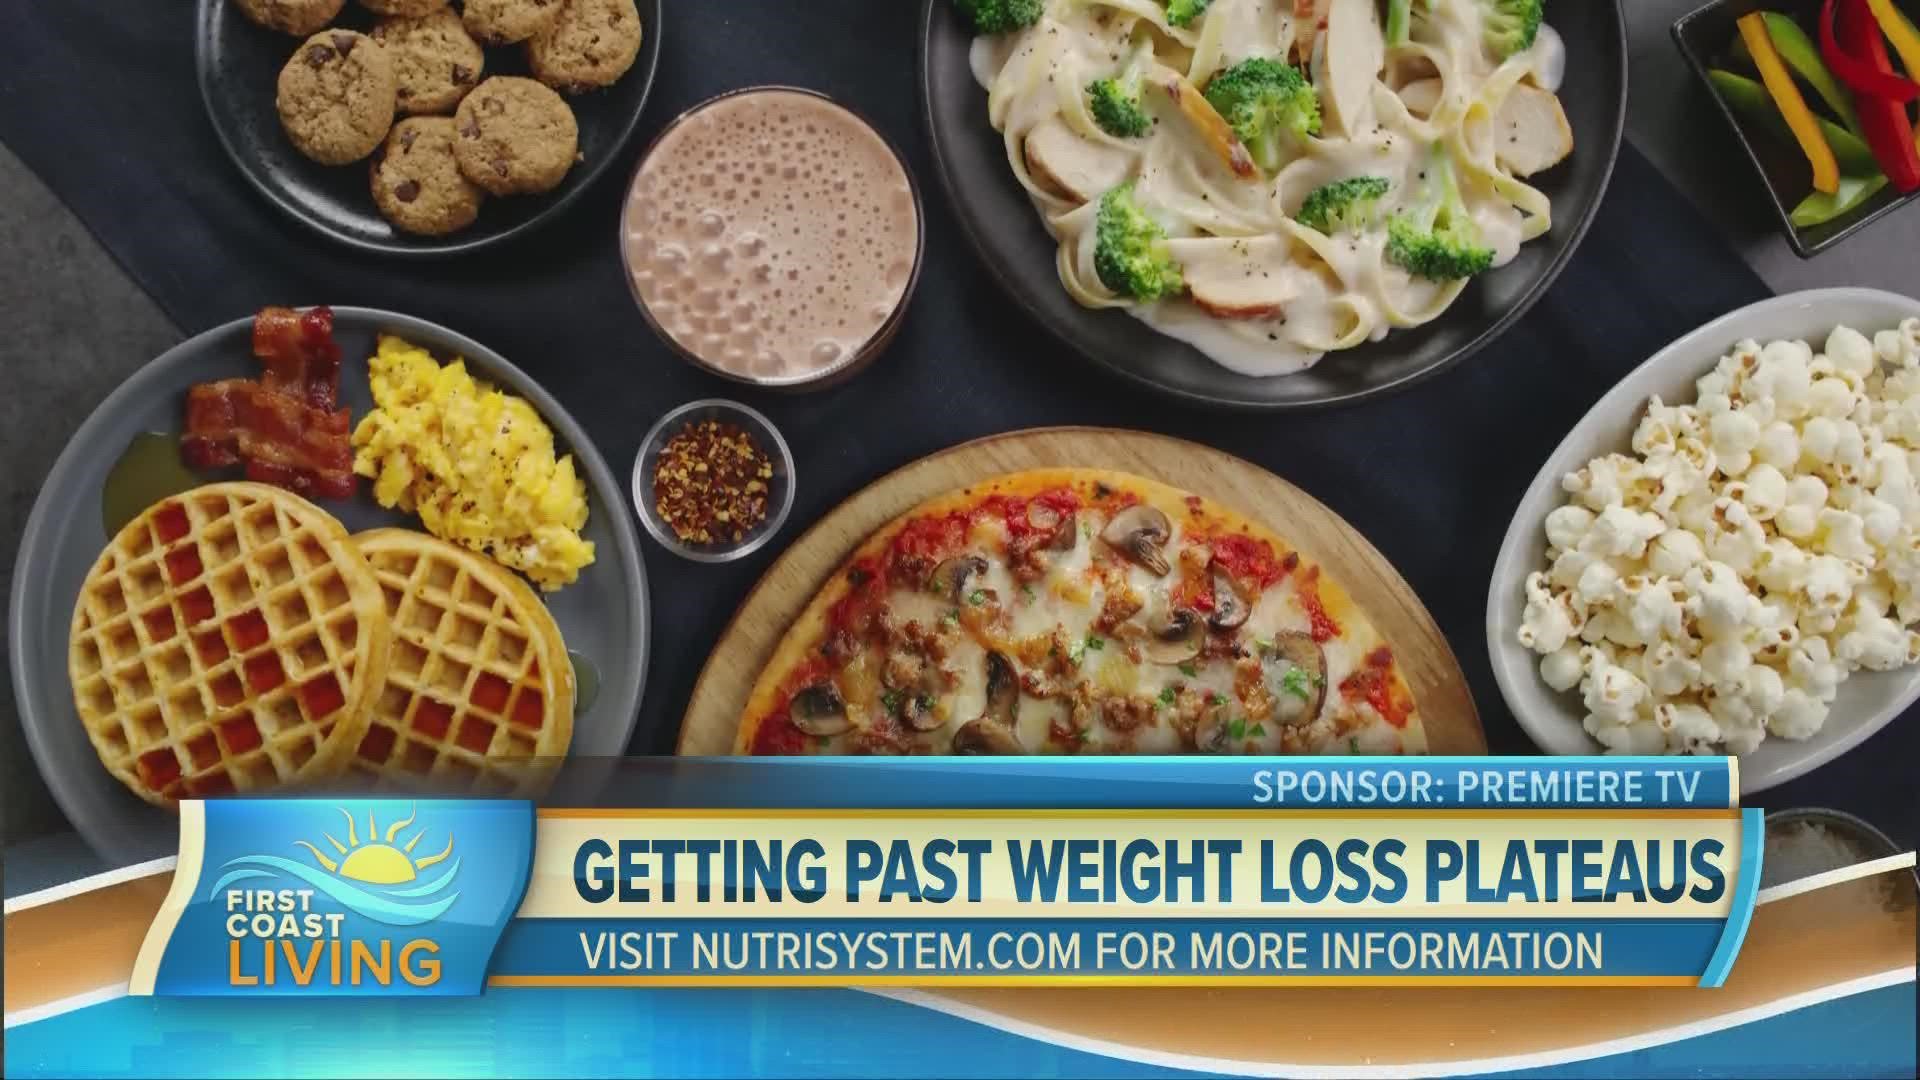 Nutritionist and Nutrisystem ambassador, Dr. Christopher Mohr offers a number of tips to overcome these hurdles.